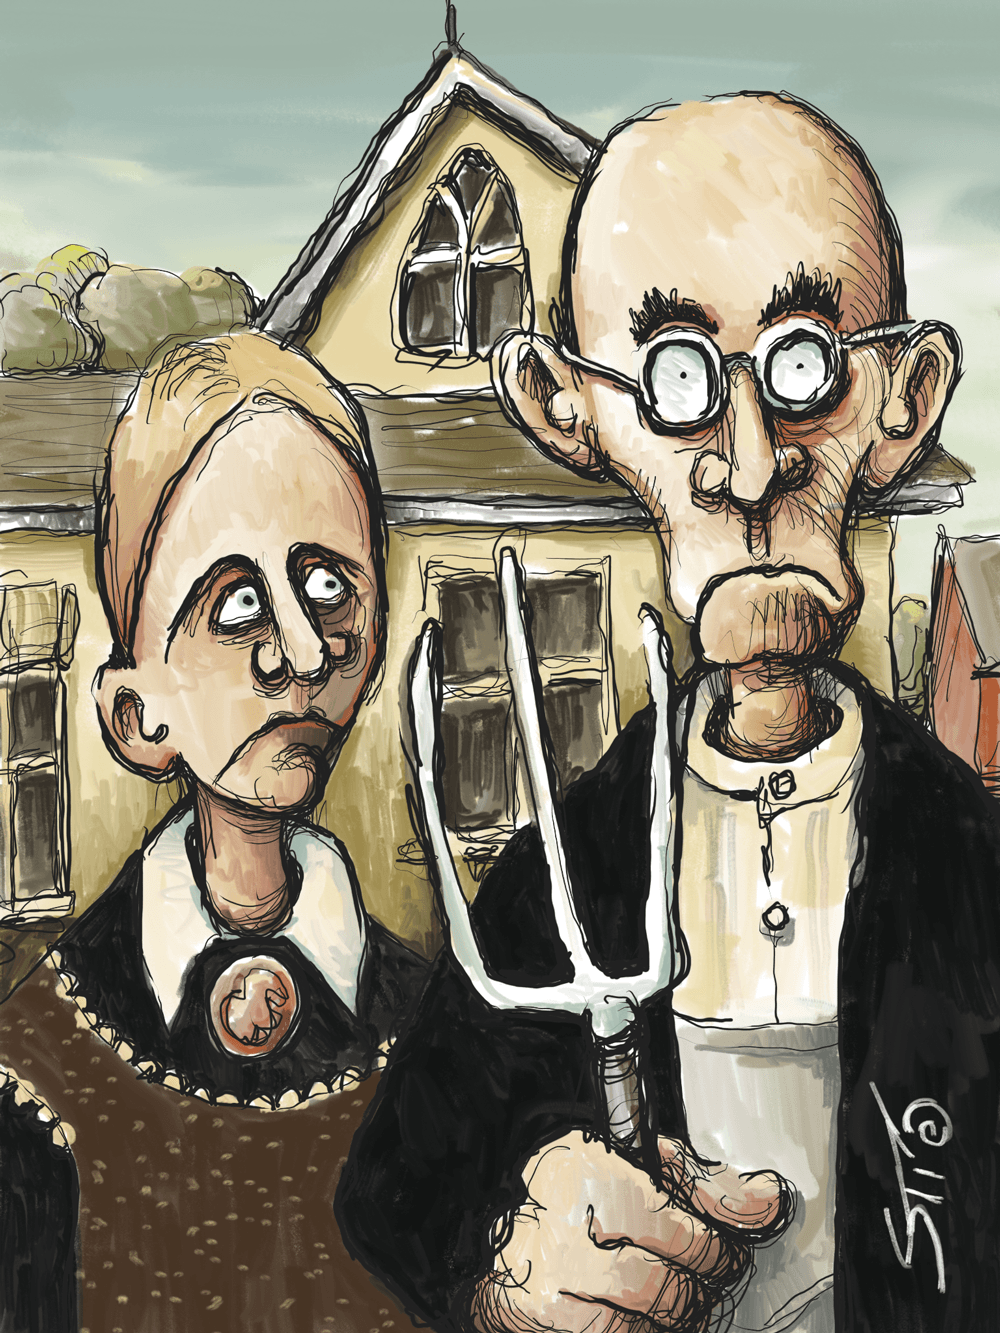 After ‘American Gothic’ by Grant Wood